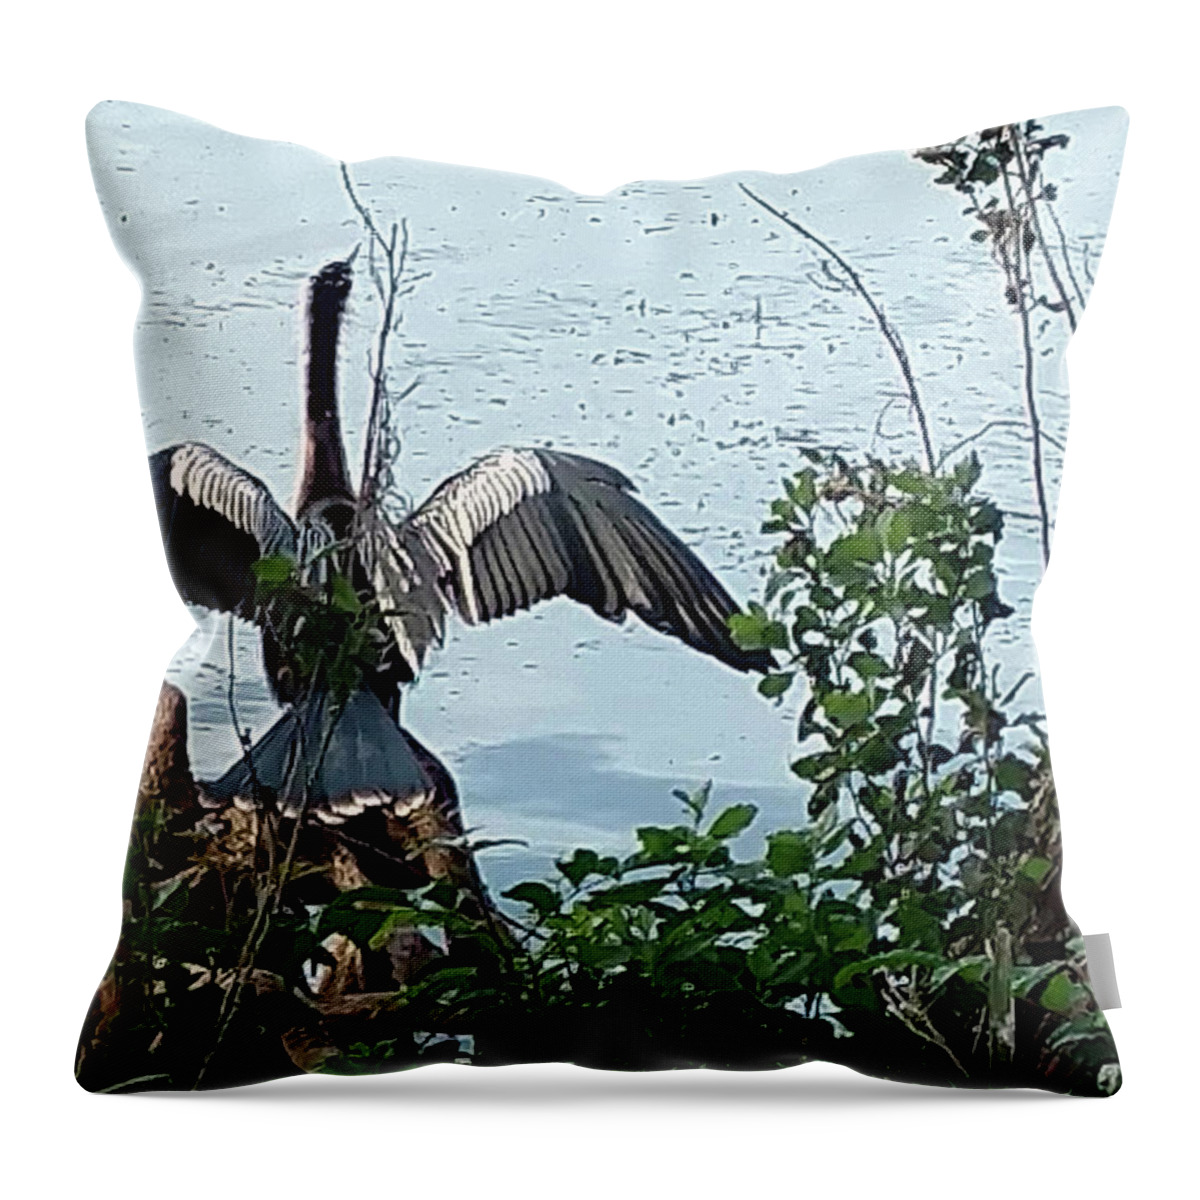 Mighty Sight Studio Throw Pillow featuring the photograph Spread Your Wings by Steve Sperry